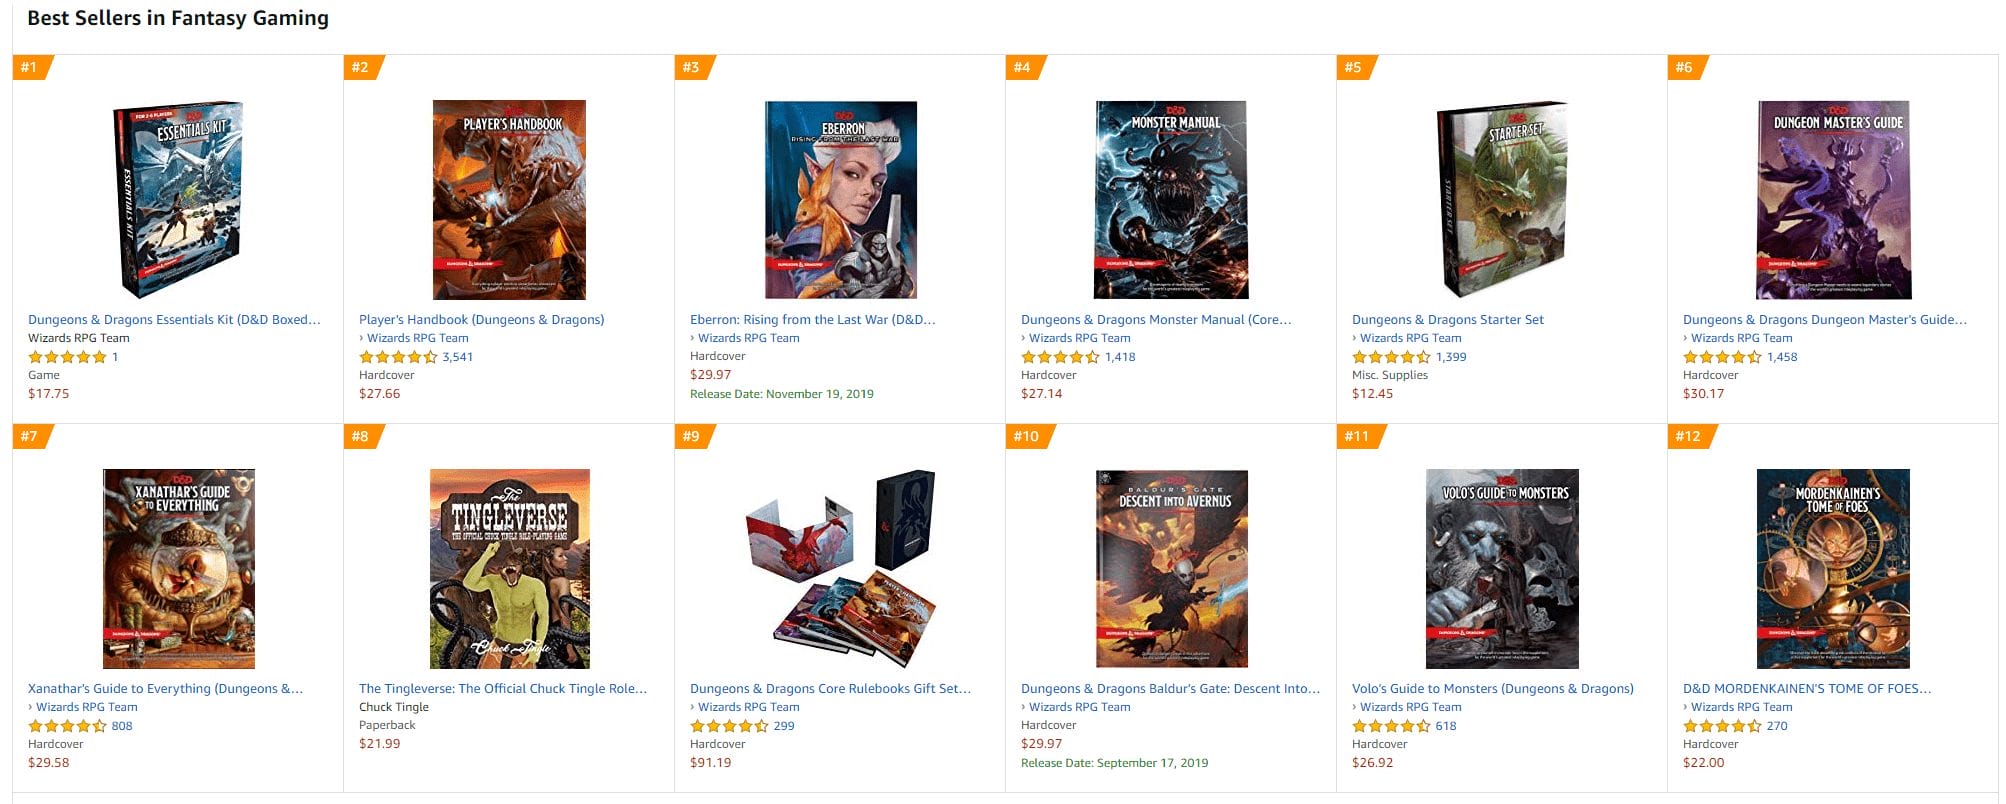 The Tingleverse RPG as Amazon's 8th best selling fantasy game.